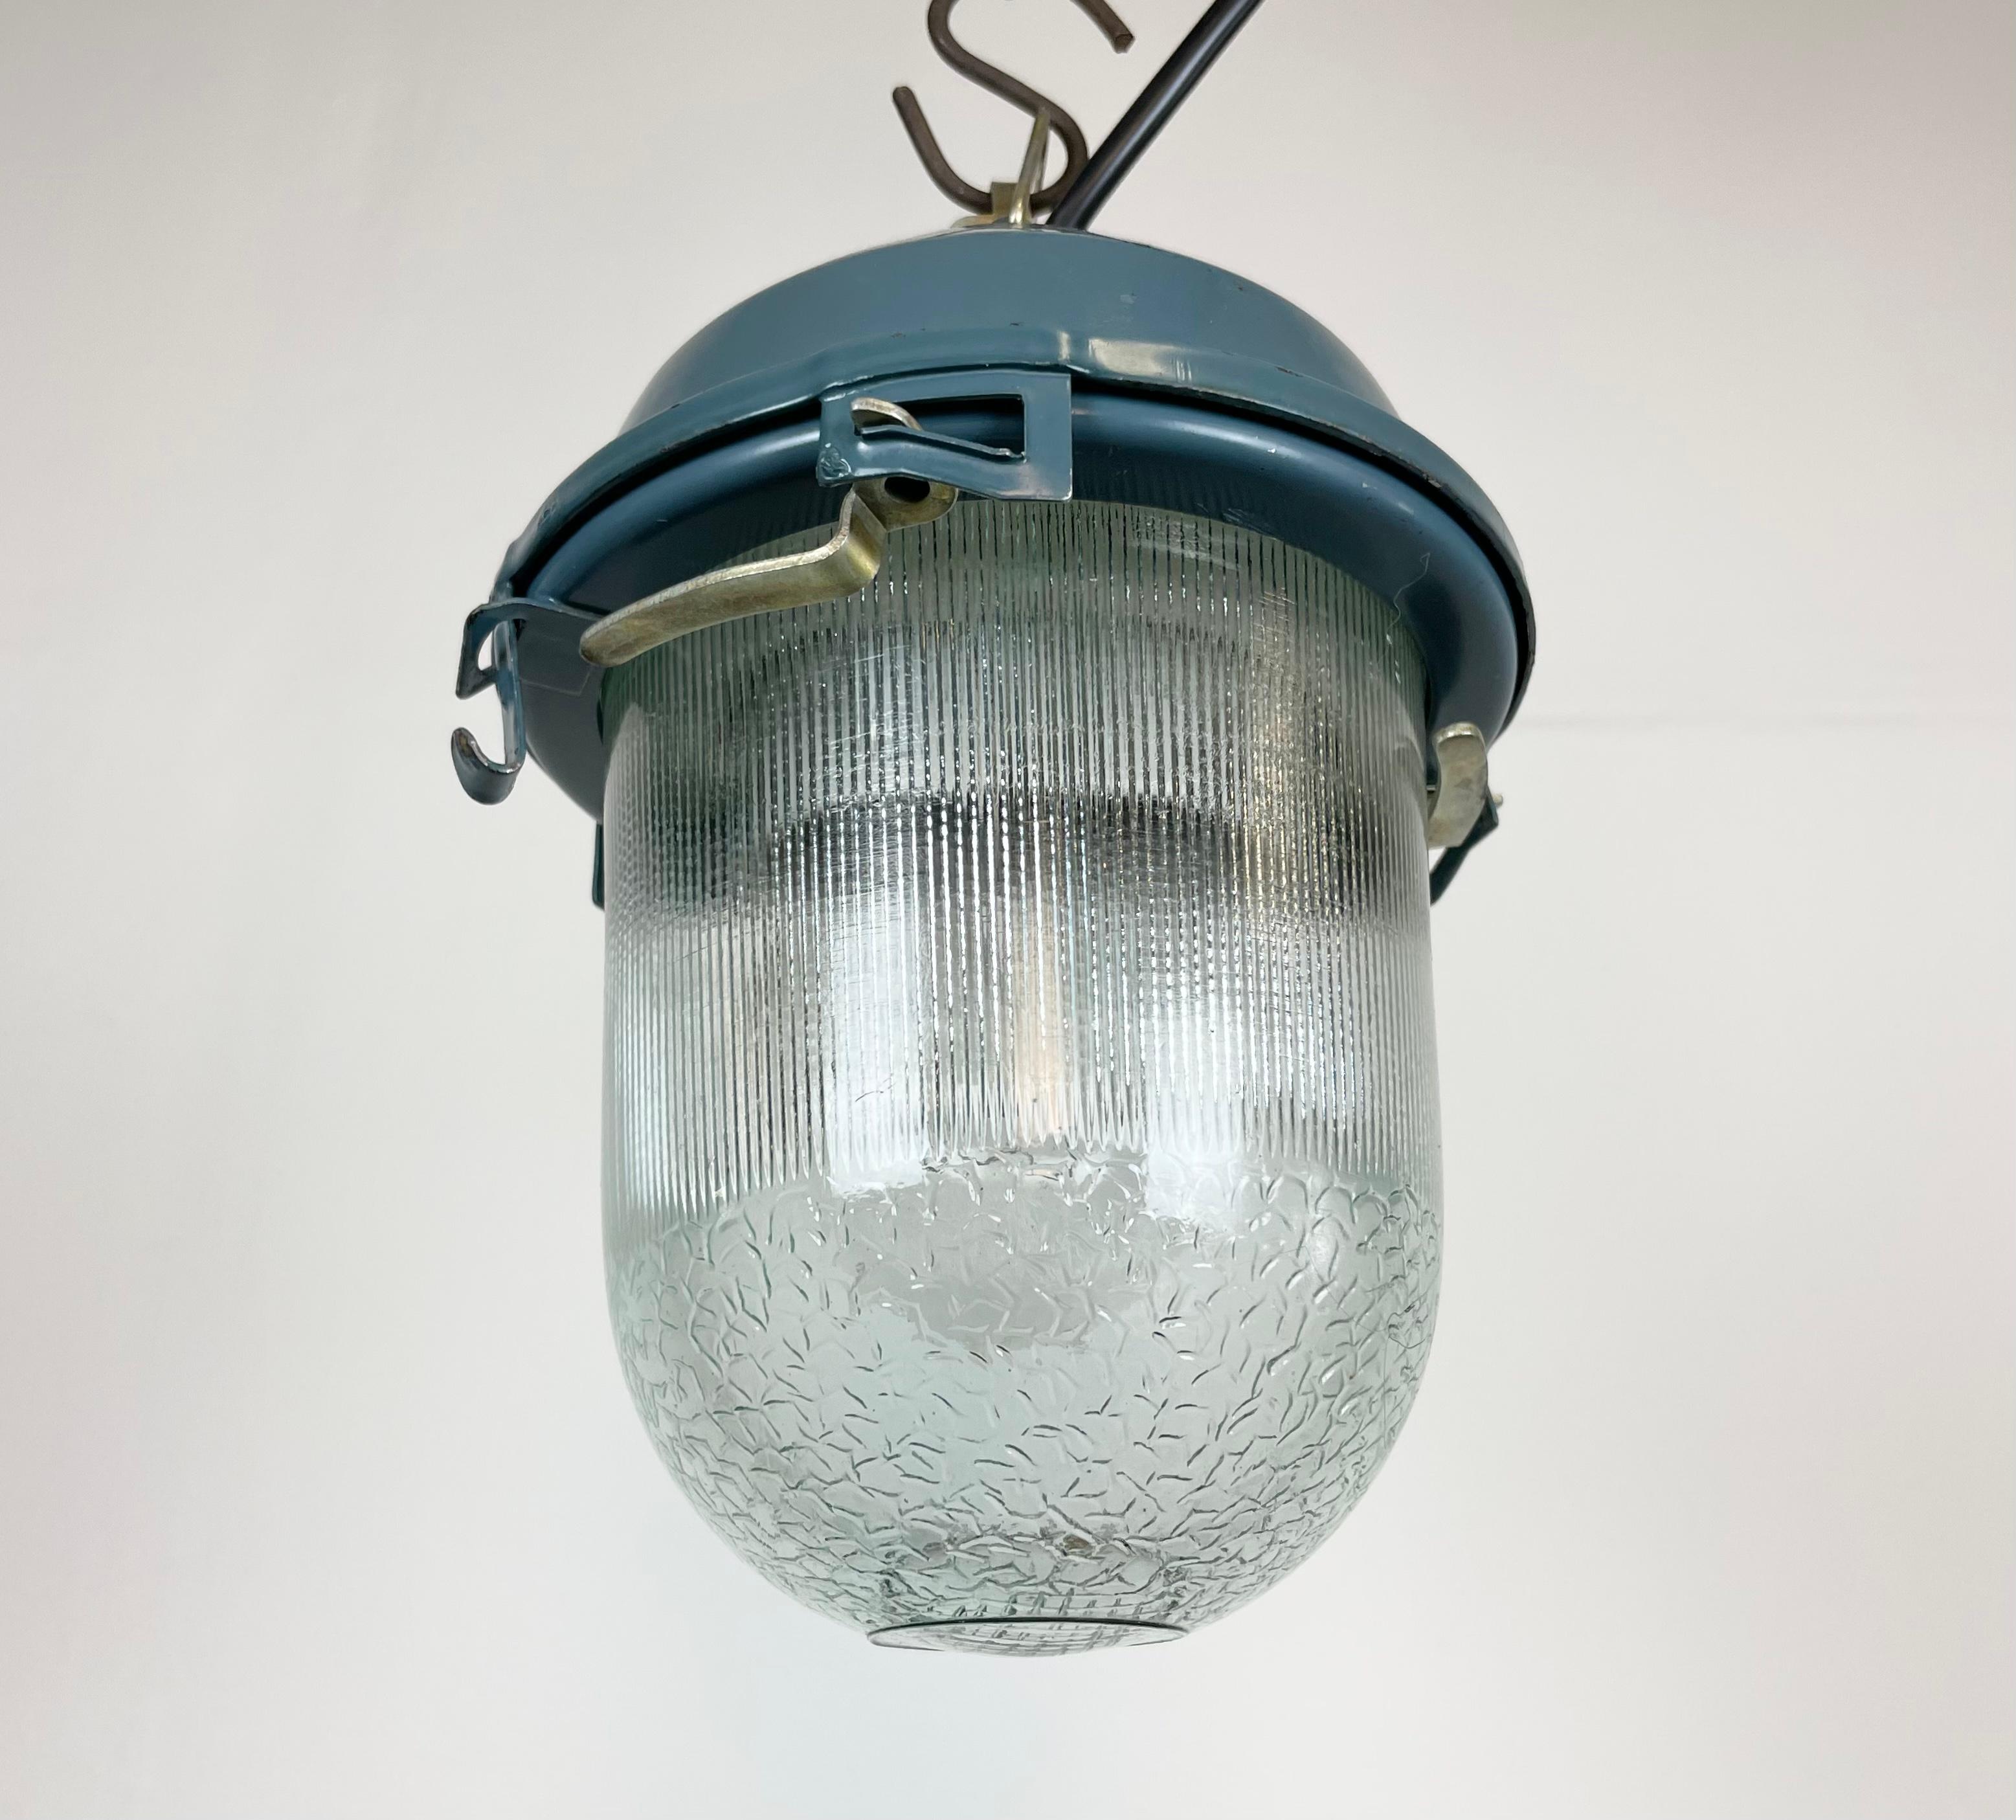 Blue Industrial Soviet Bunker Pendant Light, 1970s In Good Condition For Sale In Kojetice, CZ